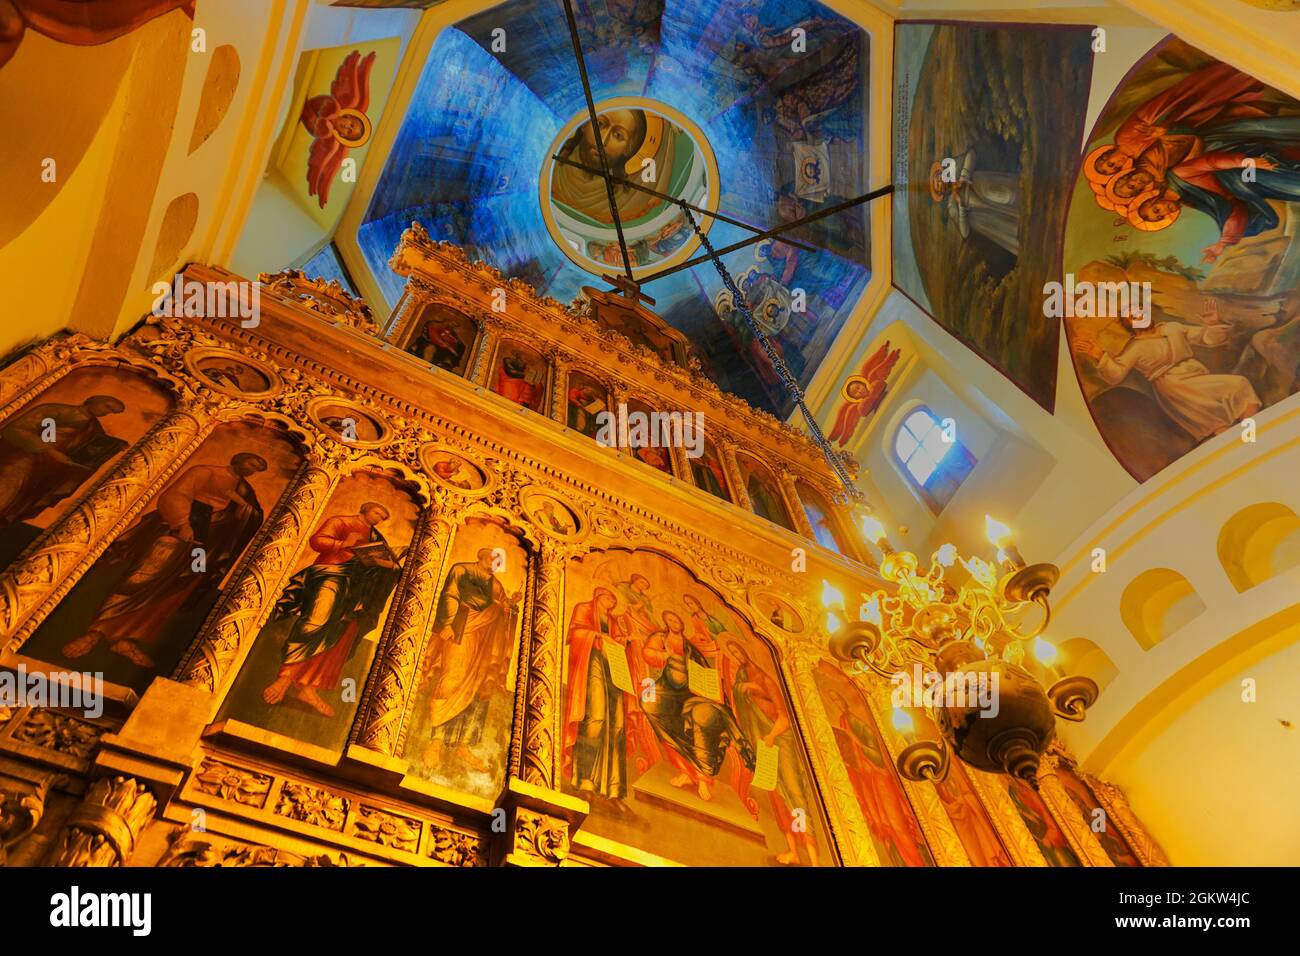 KREMLIN SQUARE , MOSCOW , RUSSIA - APRIL 27TH 2018 : Artwork on the wall inside world famous UNESCO site St. Basil's Cathedral at Kremlin sqaure, Mosc Stock Photo